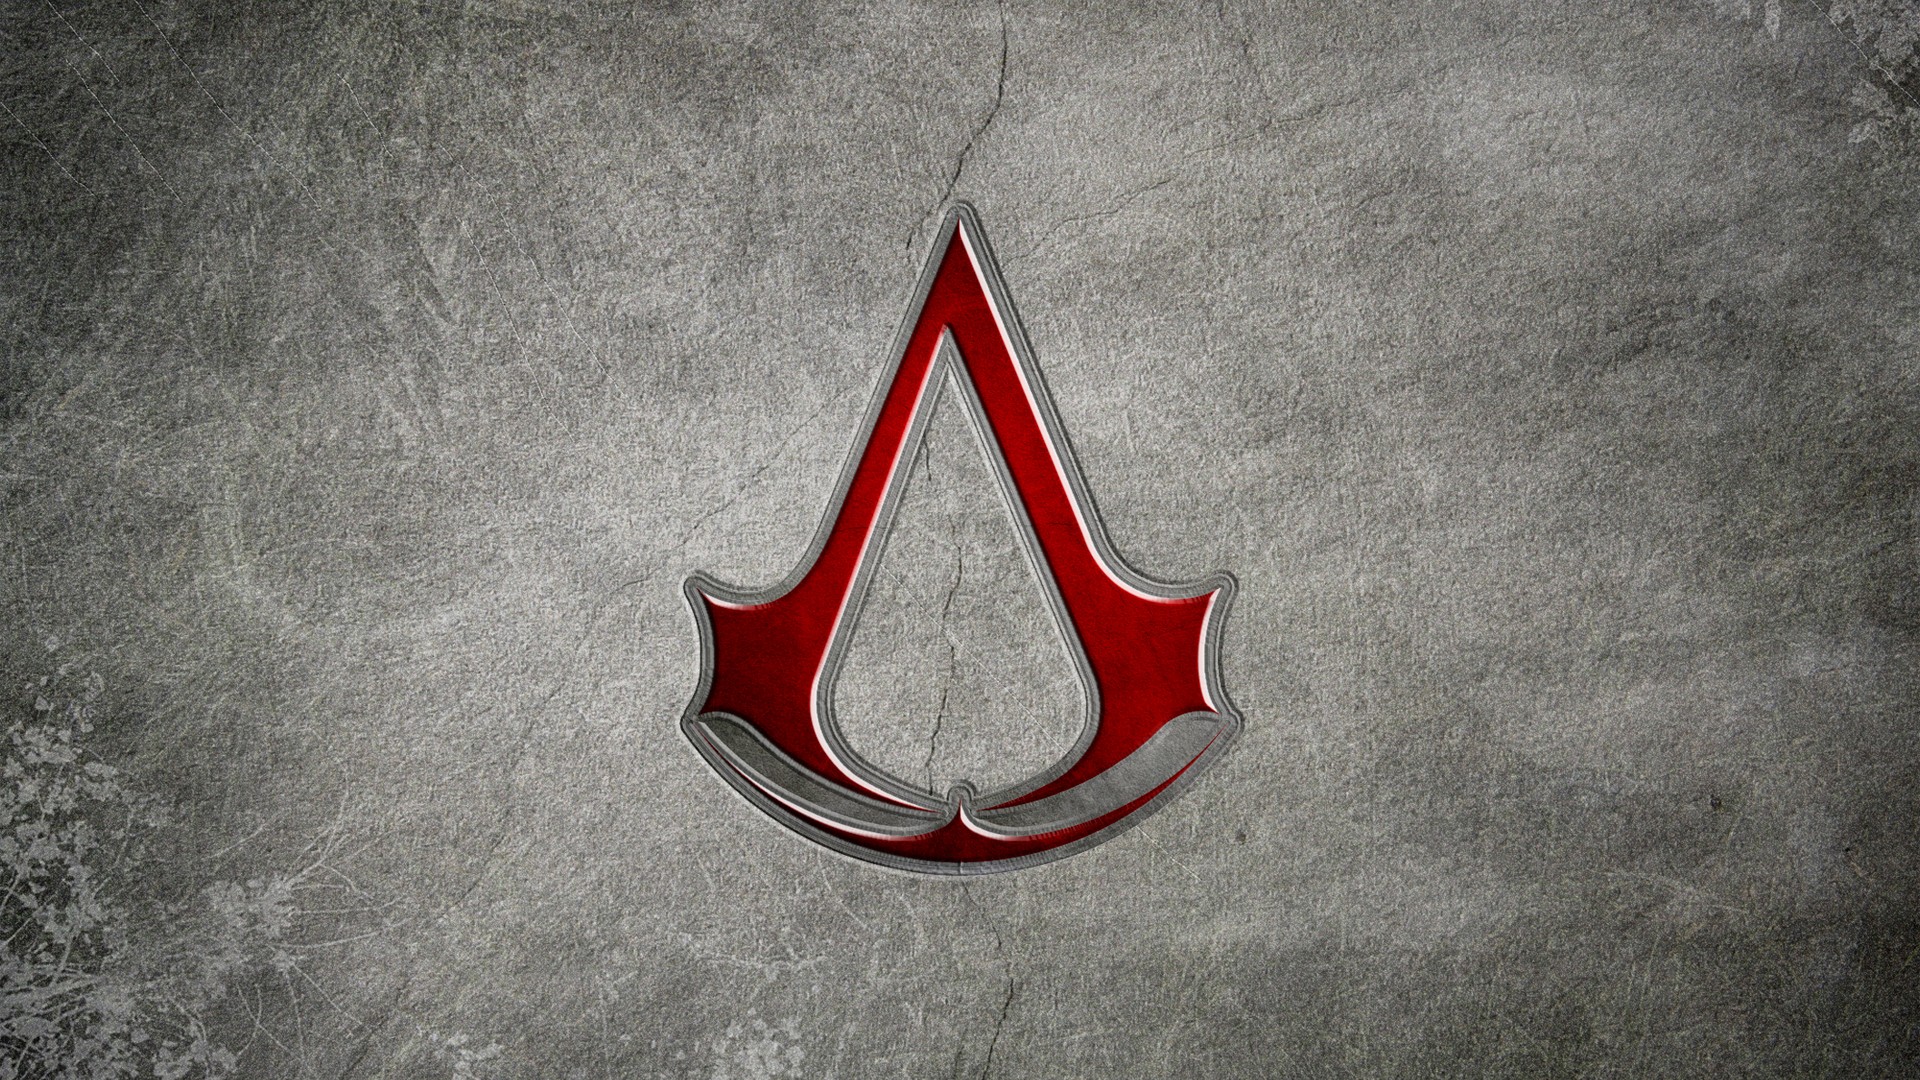 General 1920x1080 Assassin's Creed logo video games Ubisoft